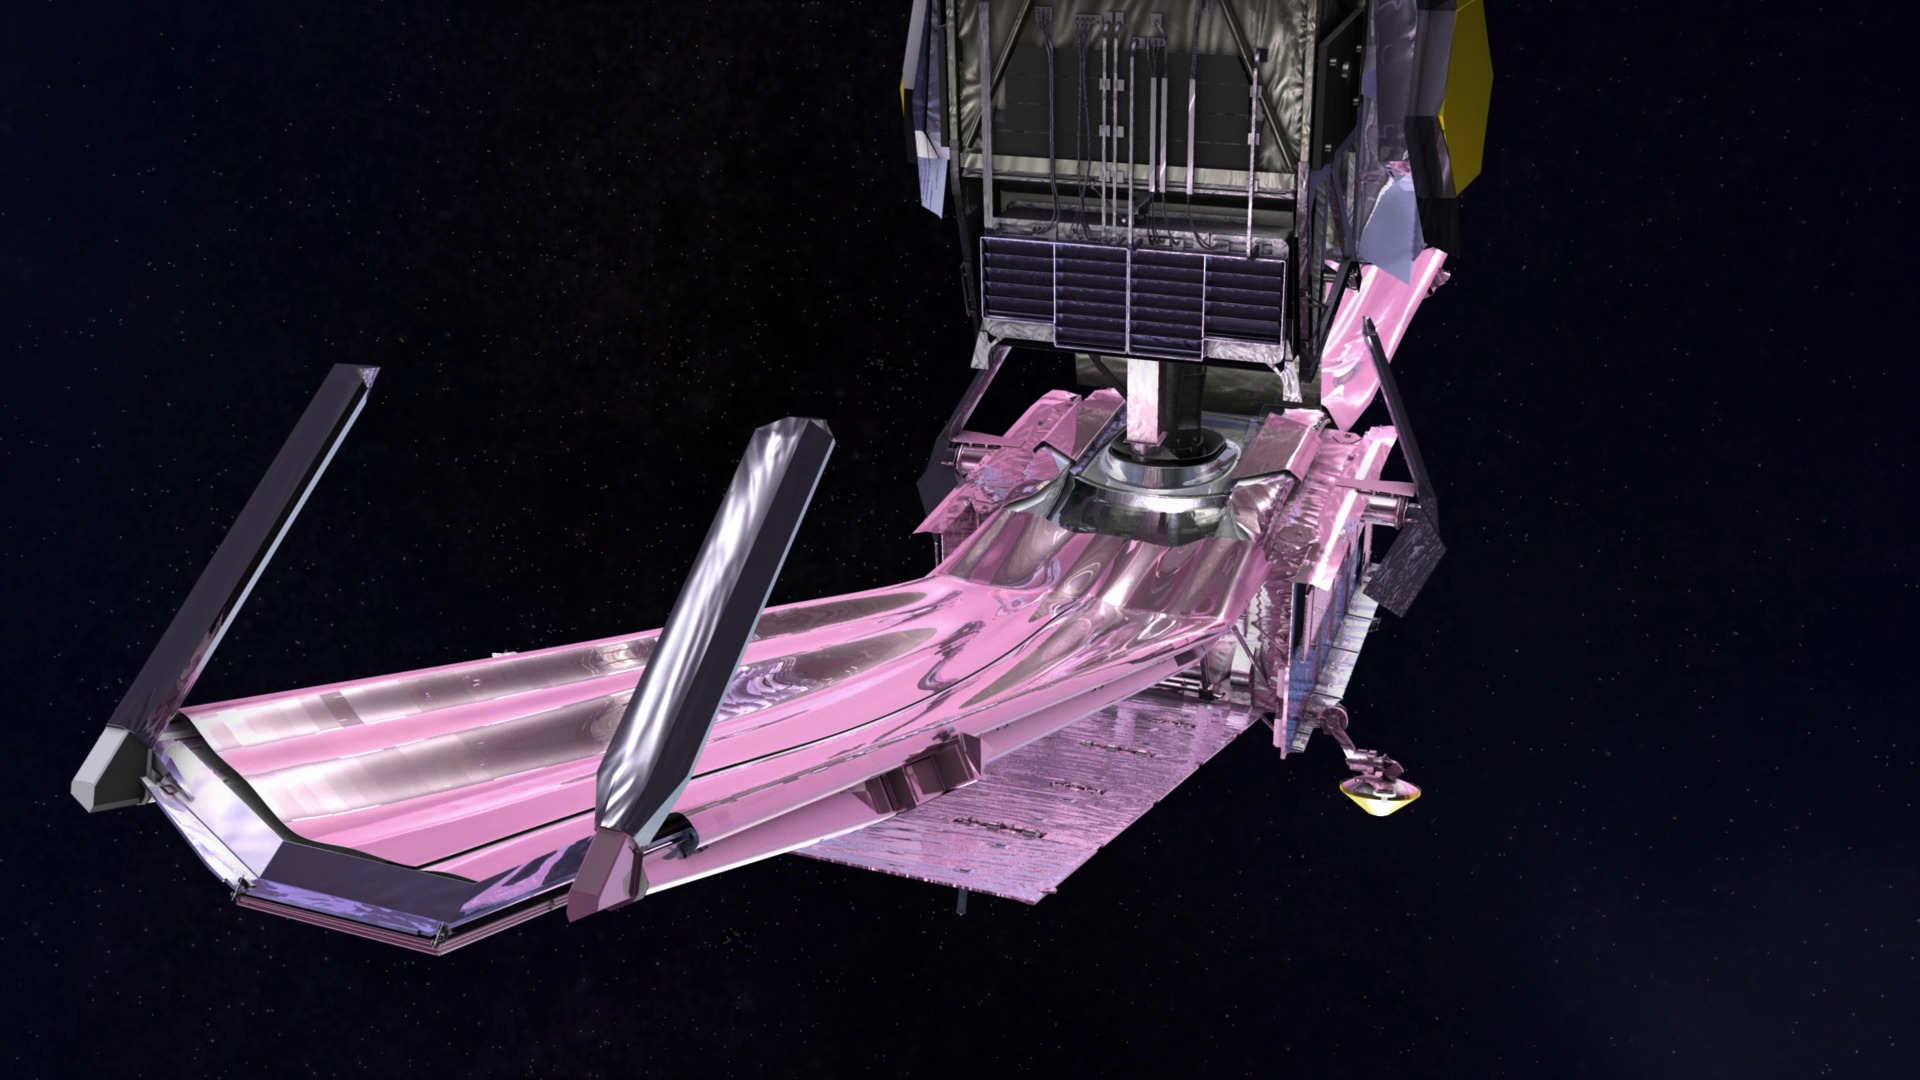 Animation showing the Webb Telescope deployments after launch based on mission duration and flight path location.  